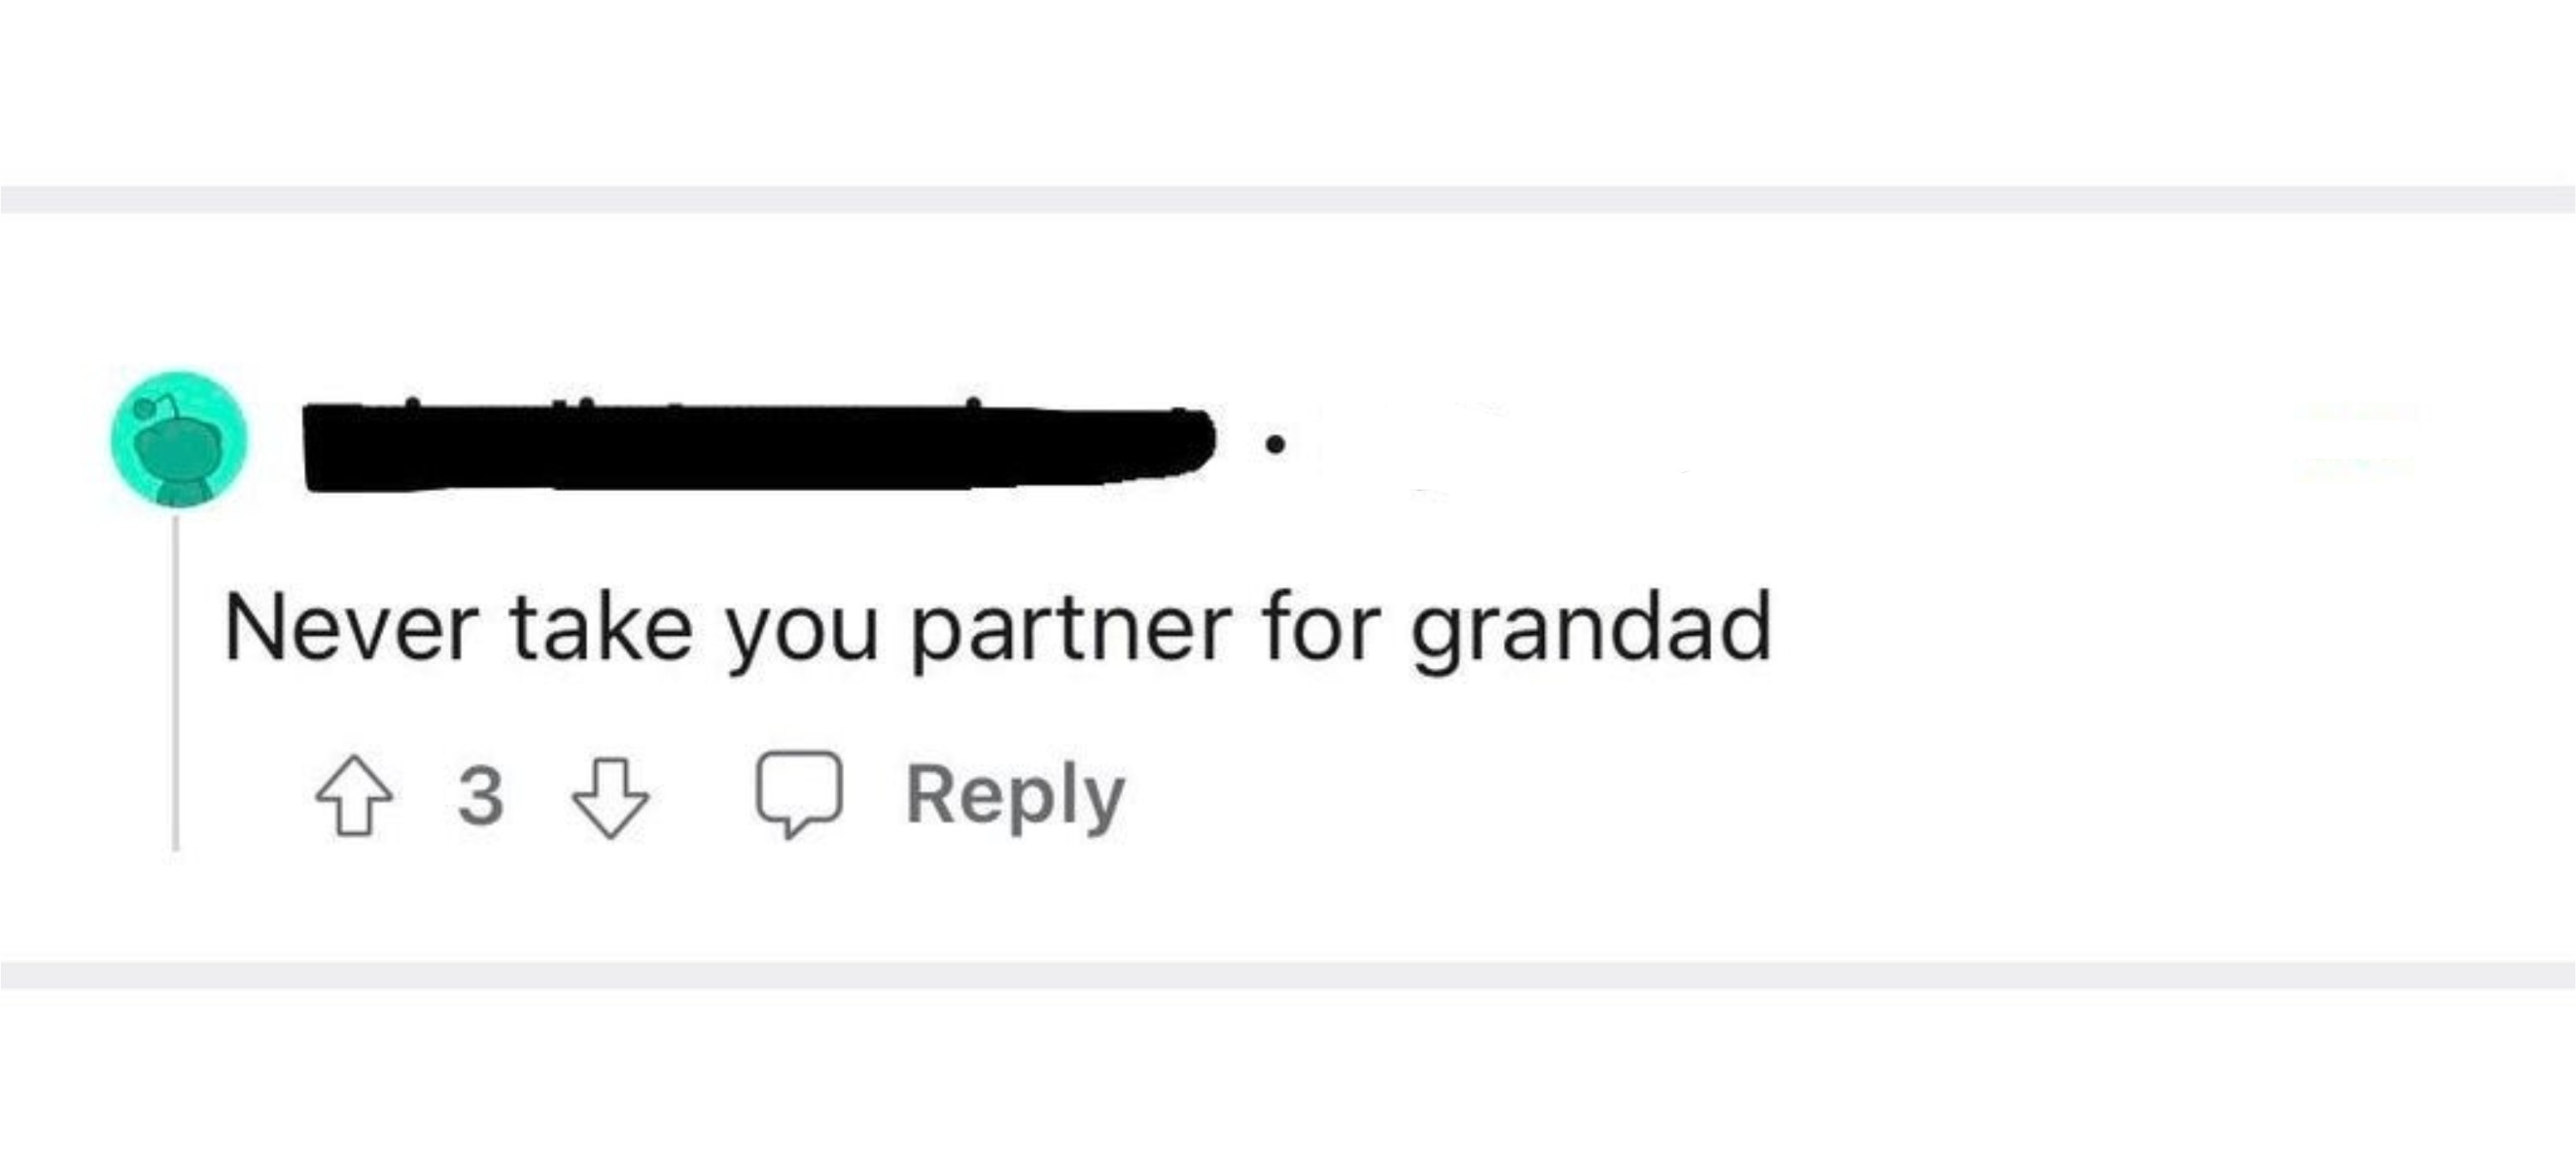 person confusing granted and grandad